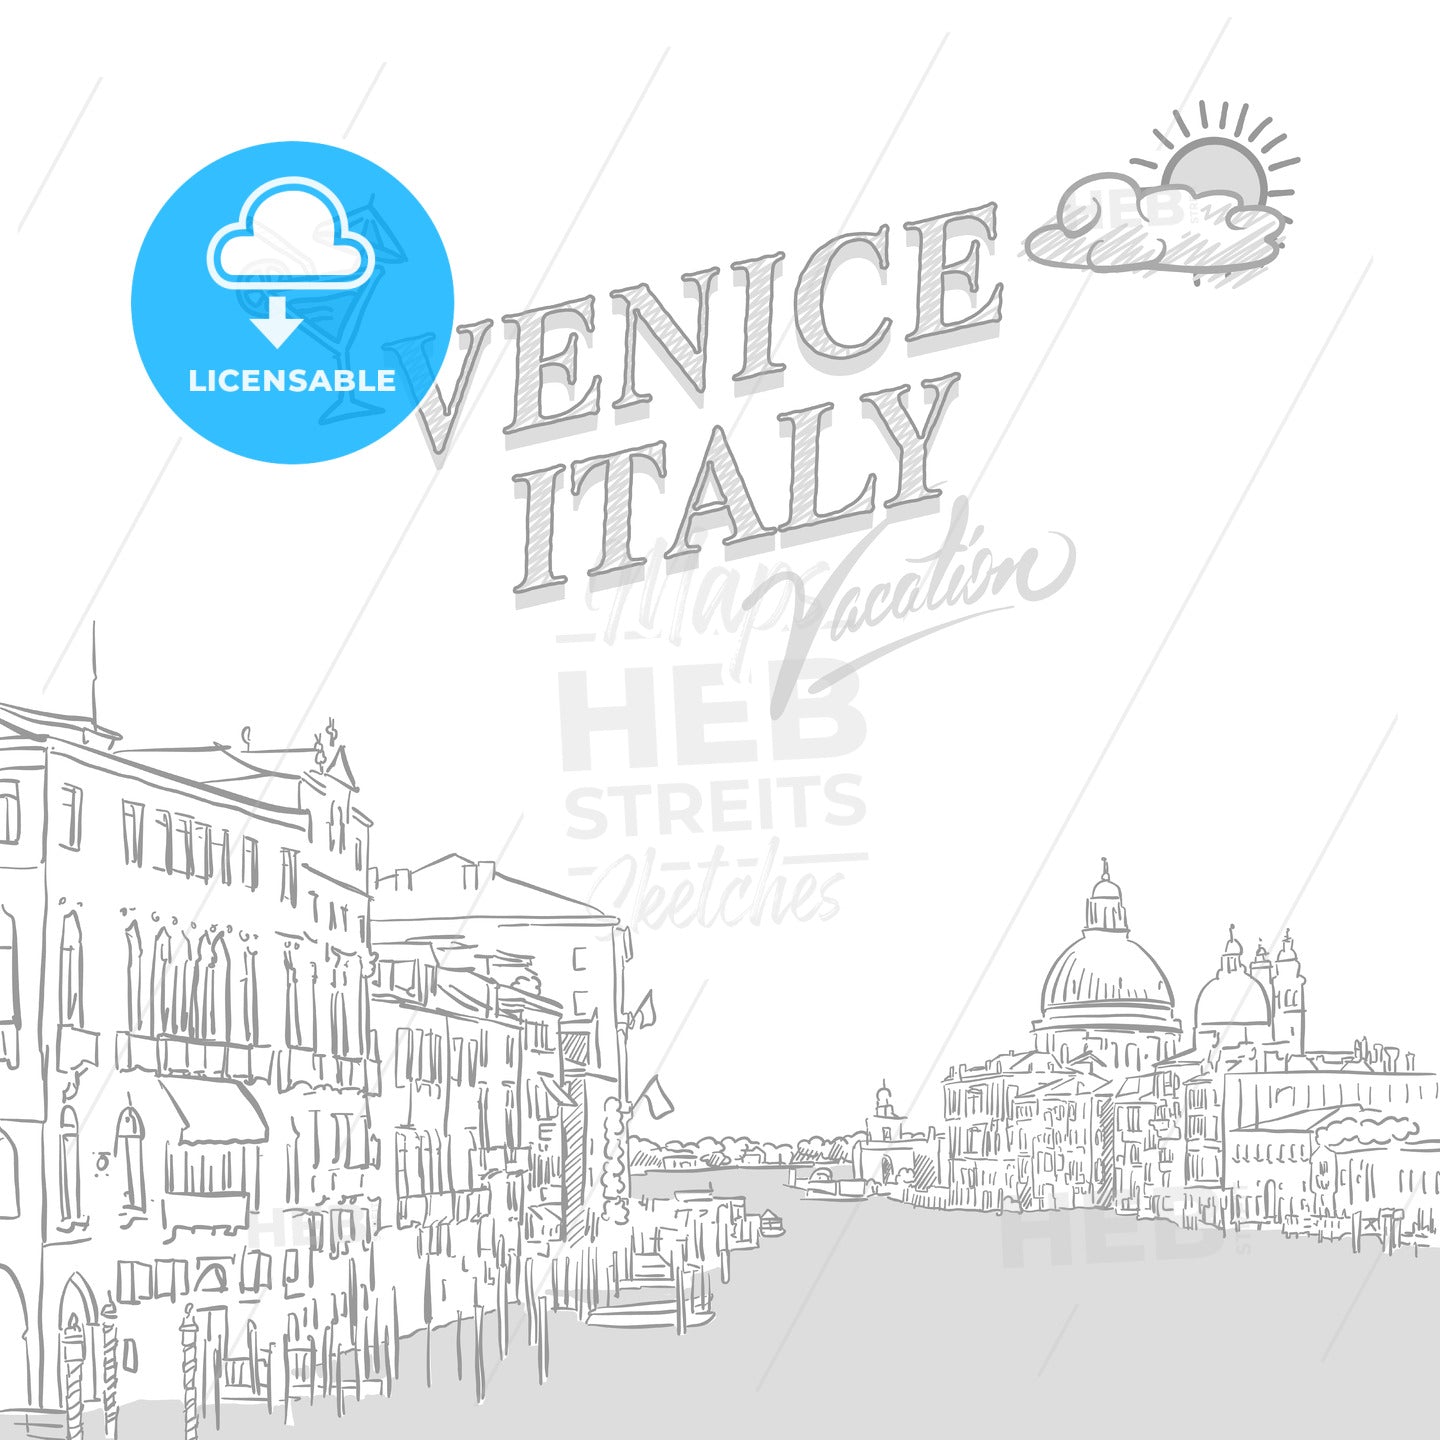 Venice travel marketing cover – instant download